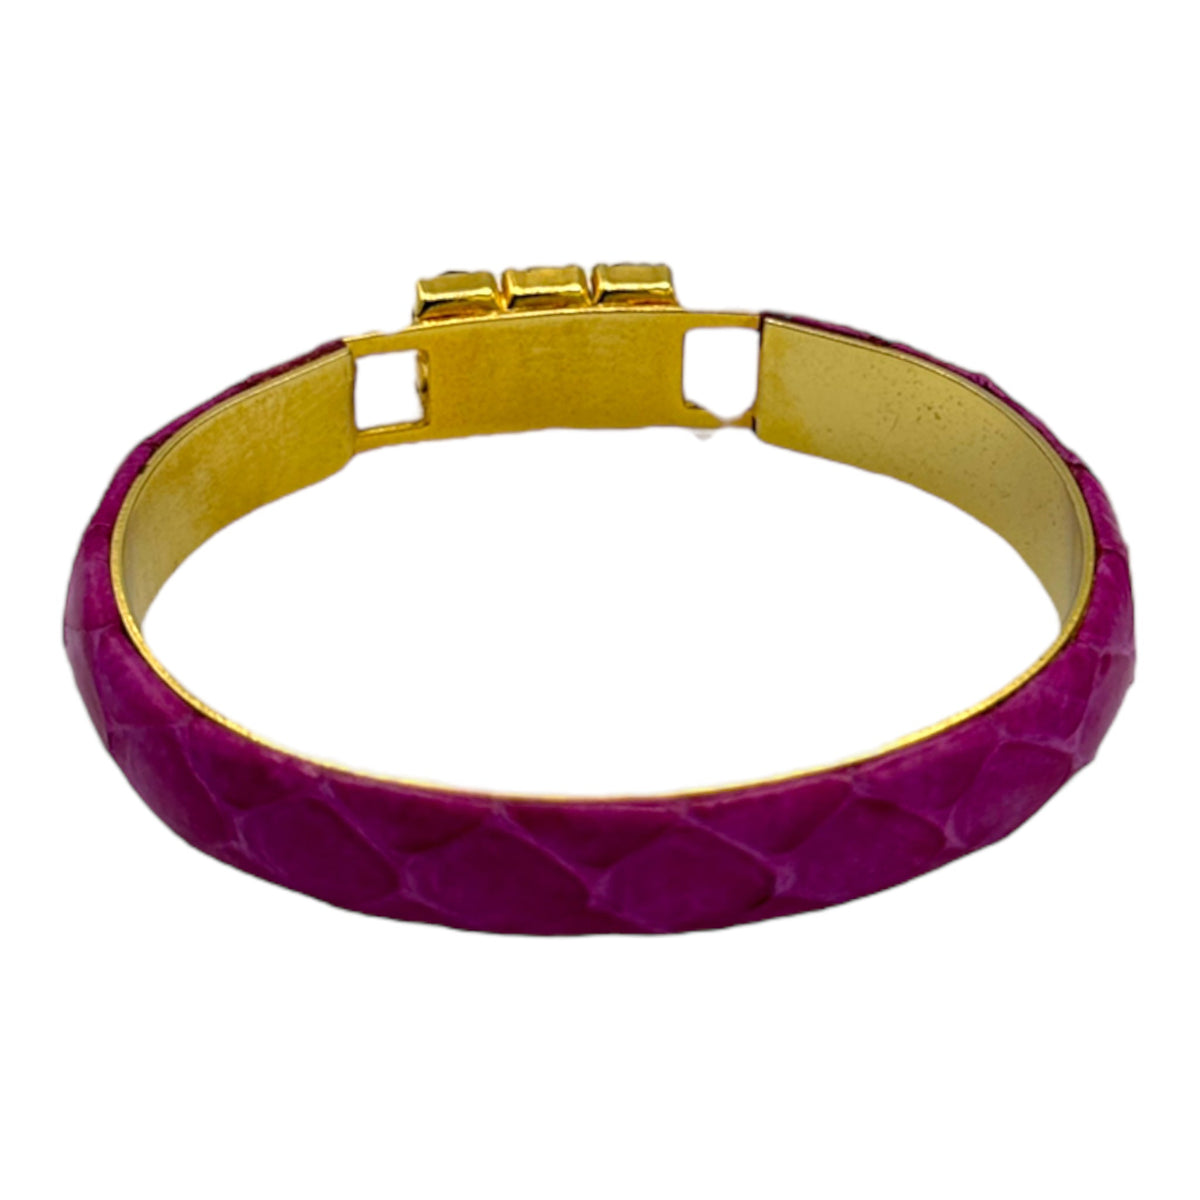 24K Gold Plated Vintage Pink Leather Bangle Bracelet Italy - 24 Wishes Vintage Jewelry